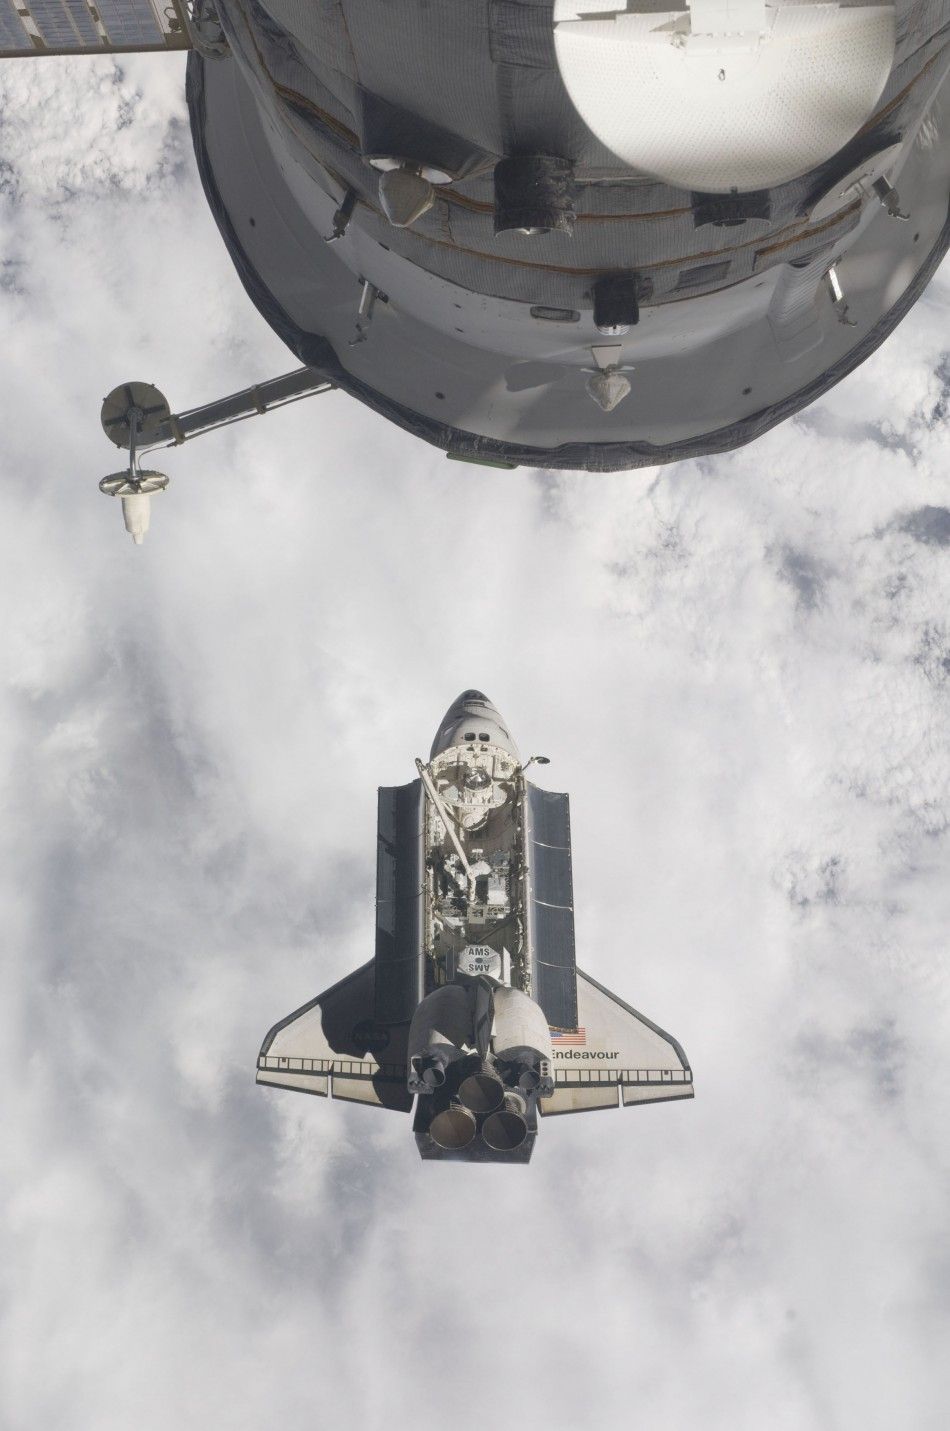 Handout photo shows the space shuttle Endeavour with the ISS in the foreground as the two spacecraft made their relative approach for docking.